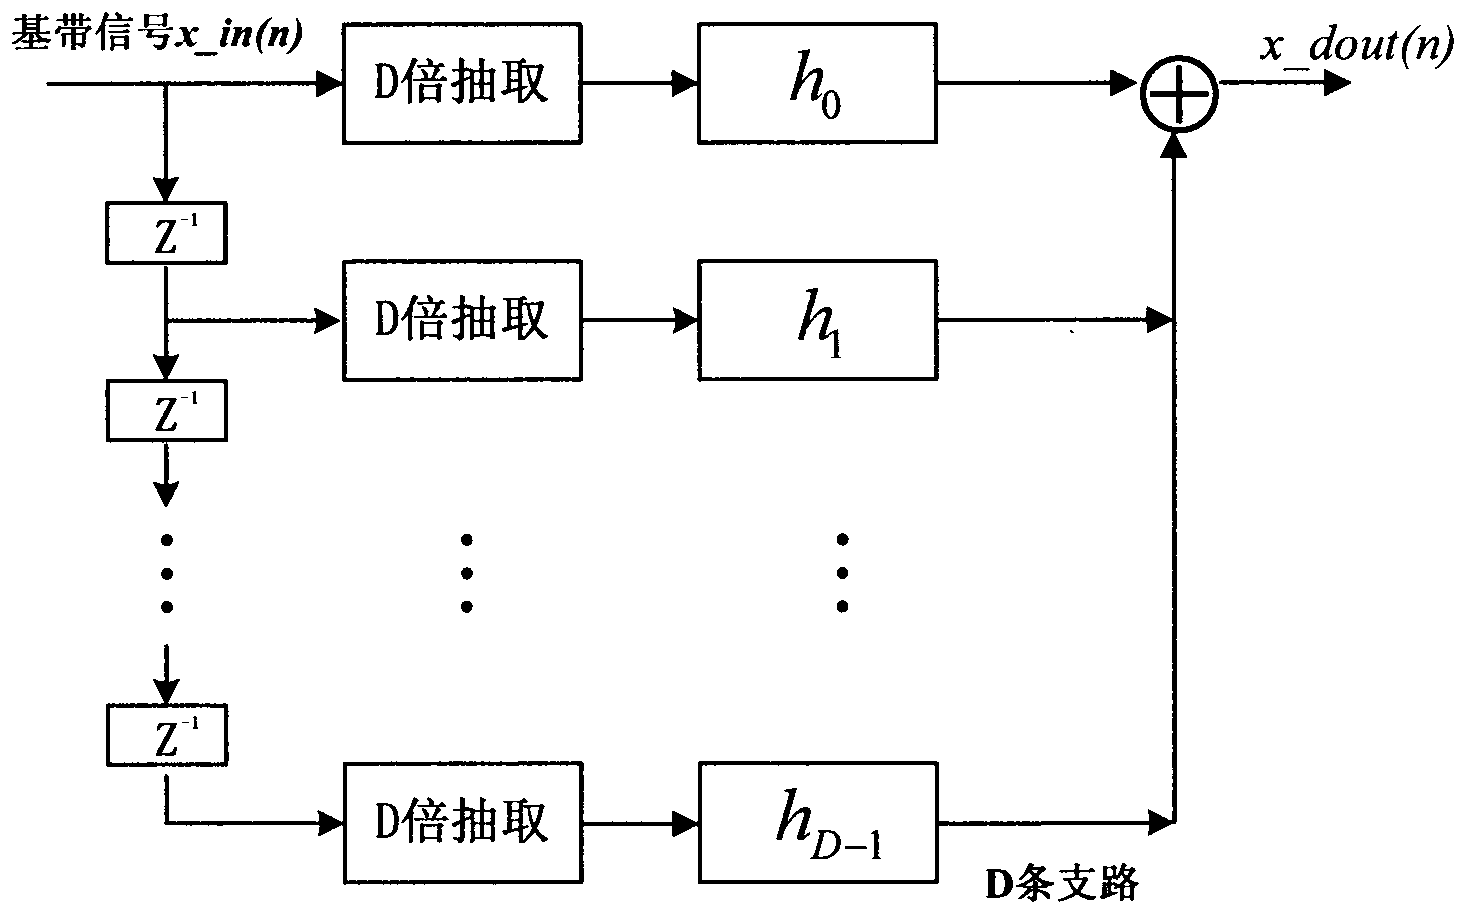 Broadband channelization reception system of radar with external radiation source and FPGA (Field Programmable Gate Array) implementation method